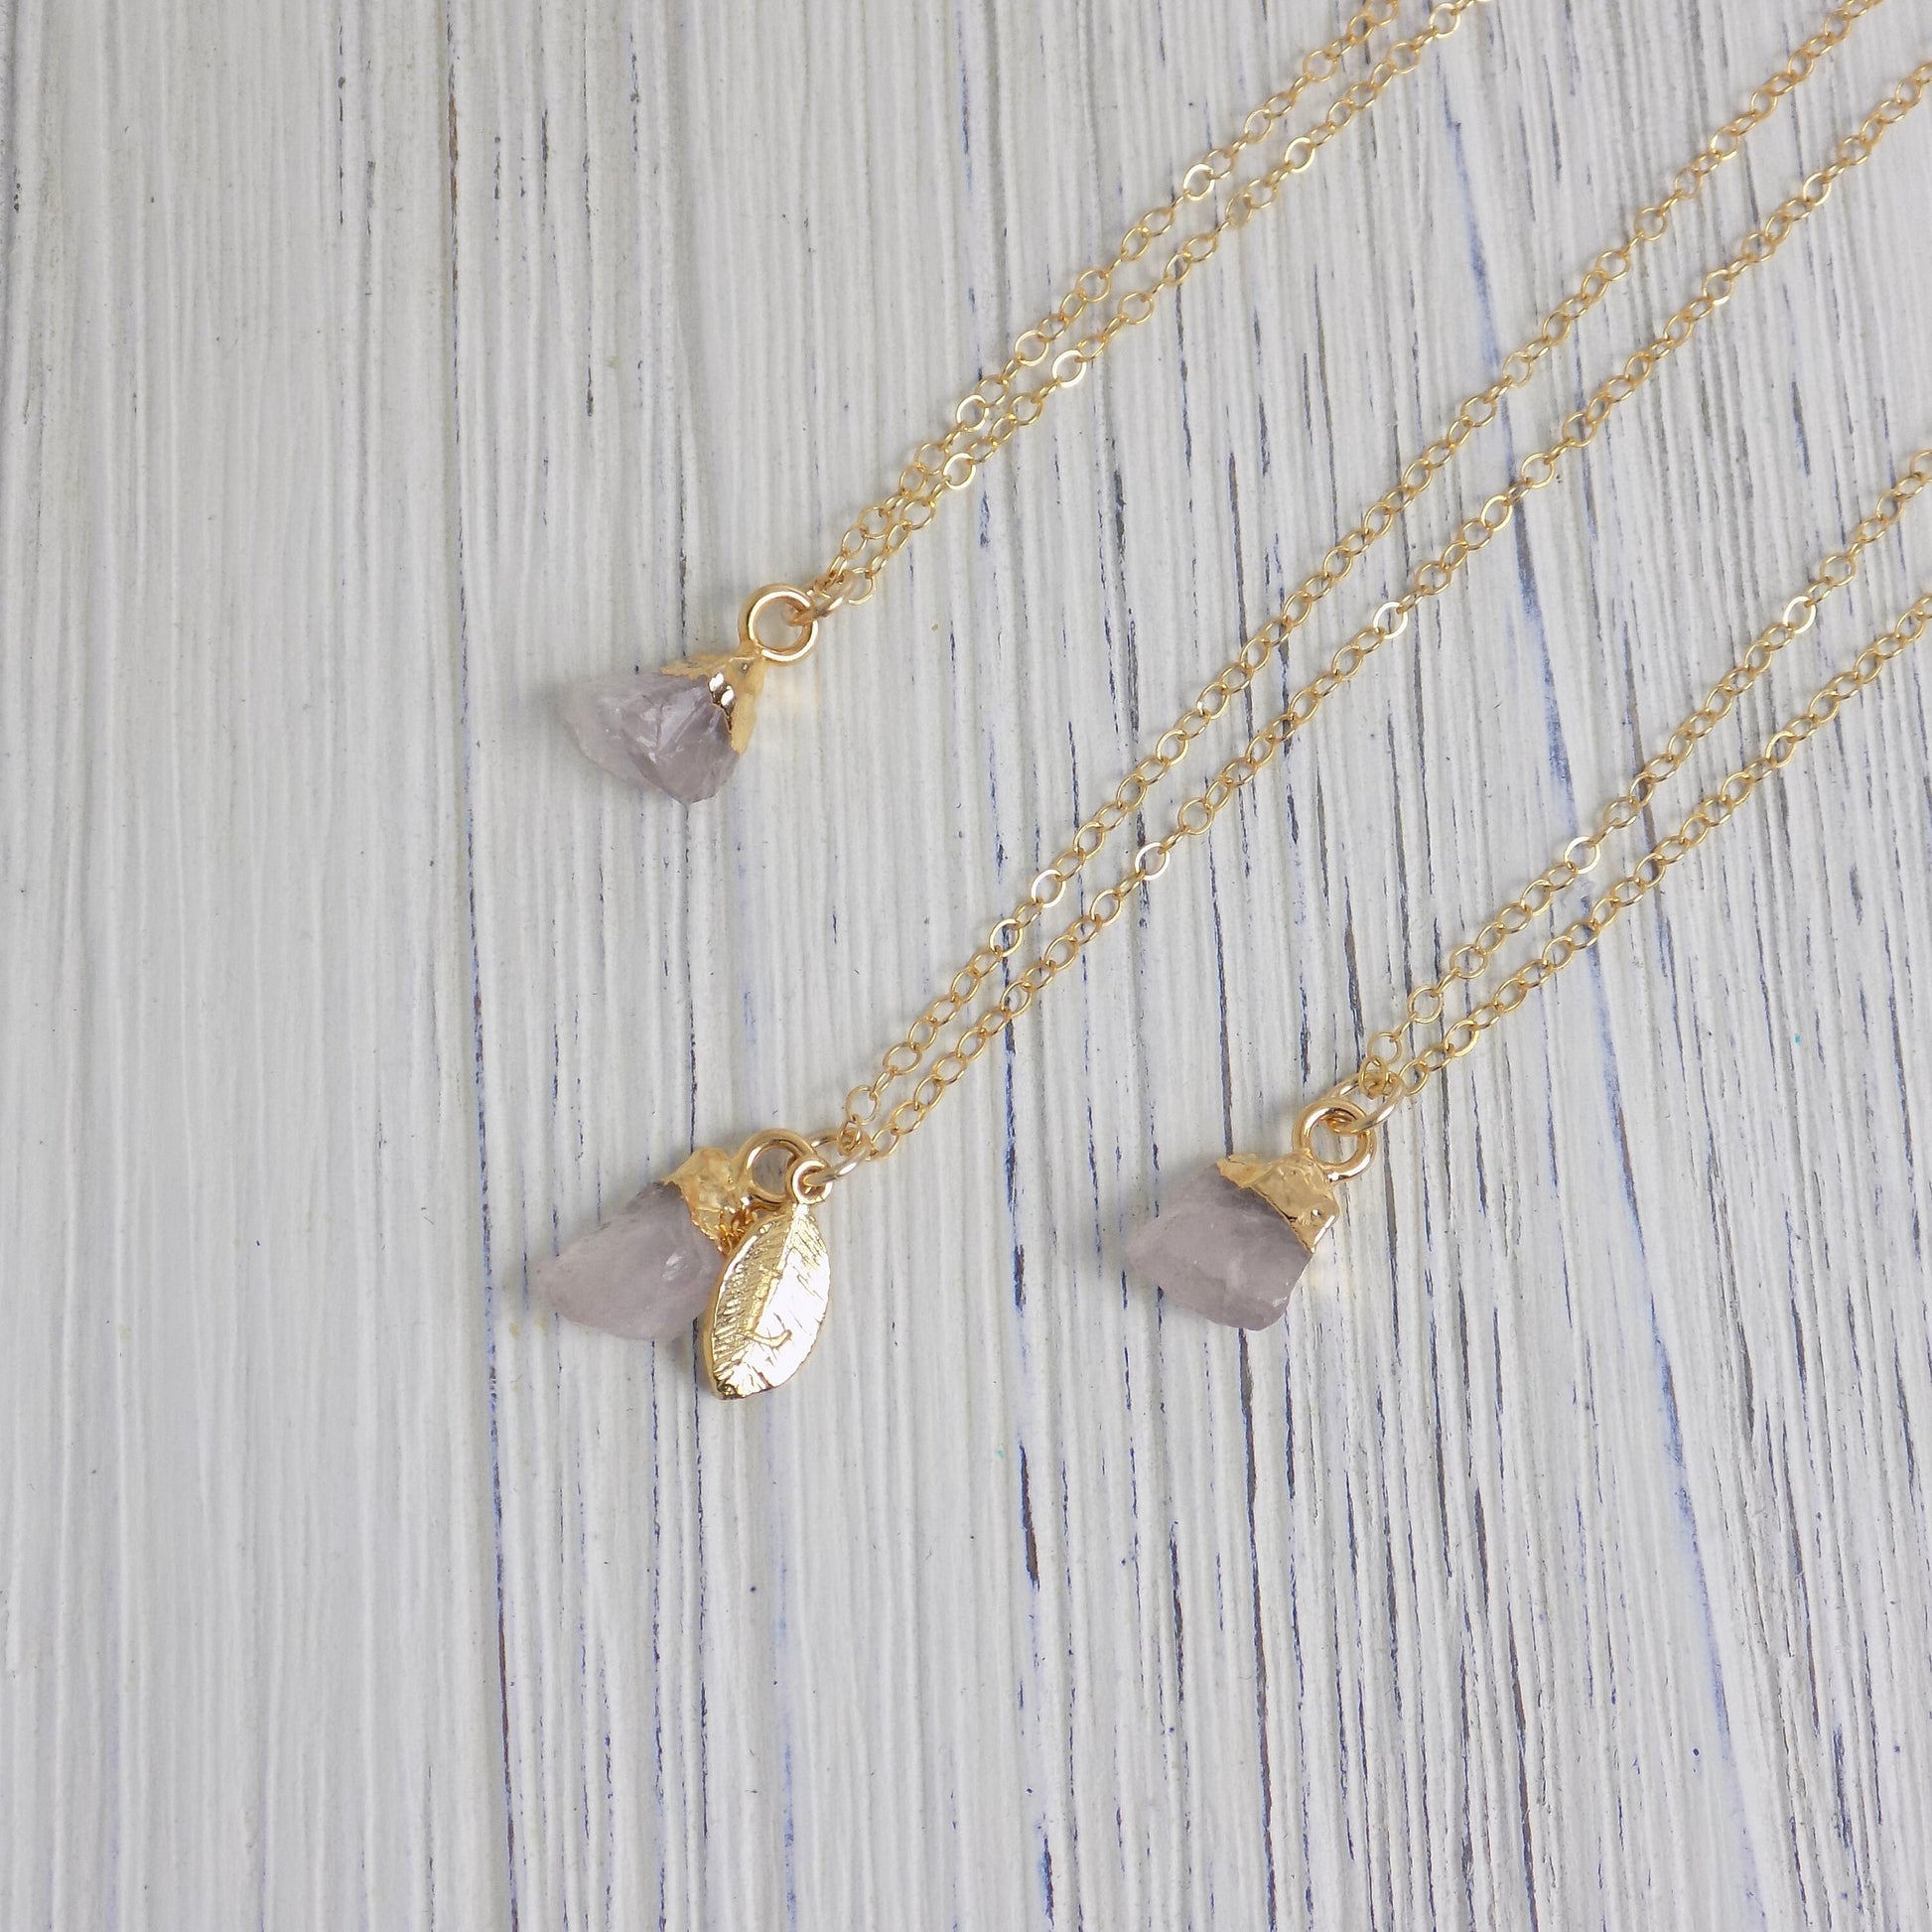 Gifts For Her - Raw Rose Quartz Necklace on 14K Gold Filled Chain